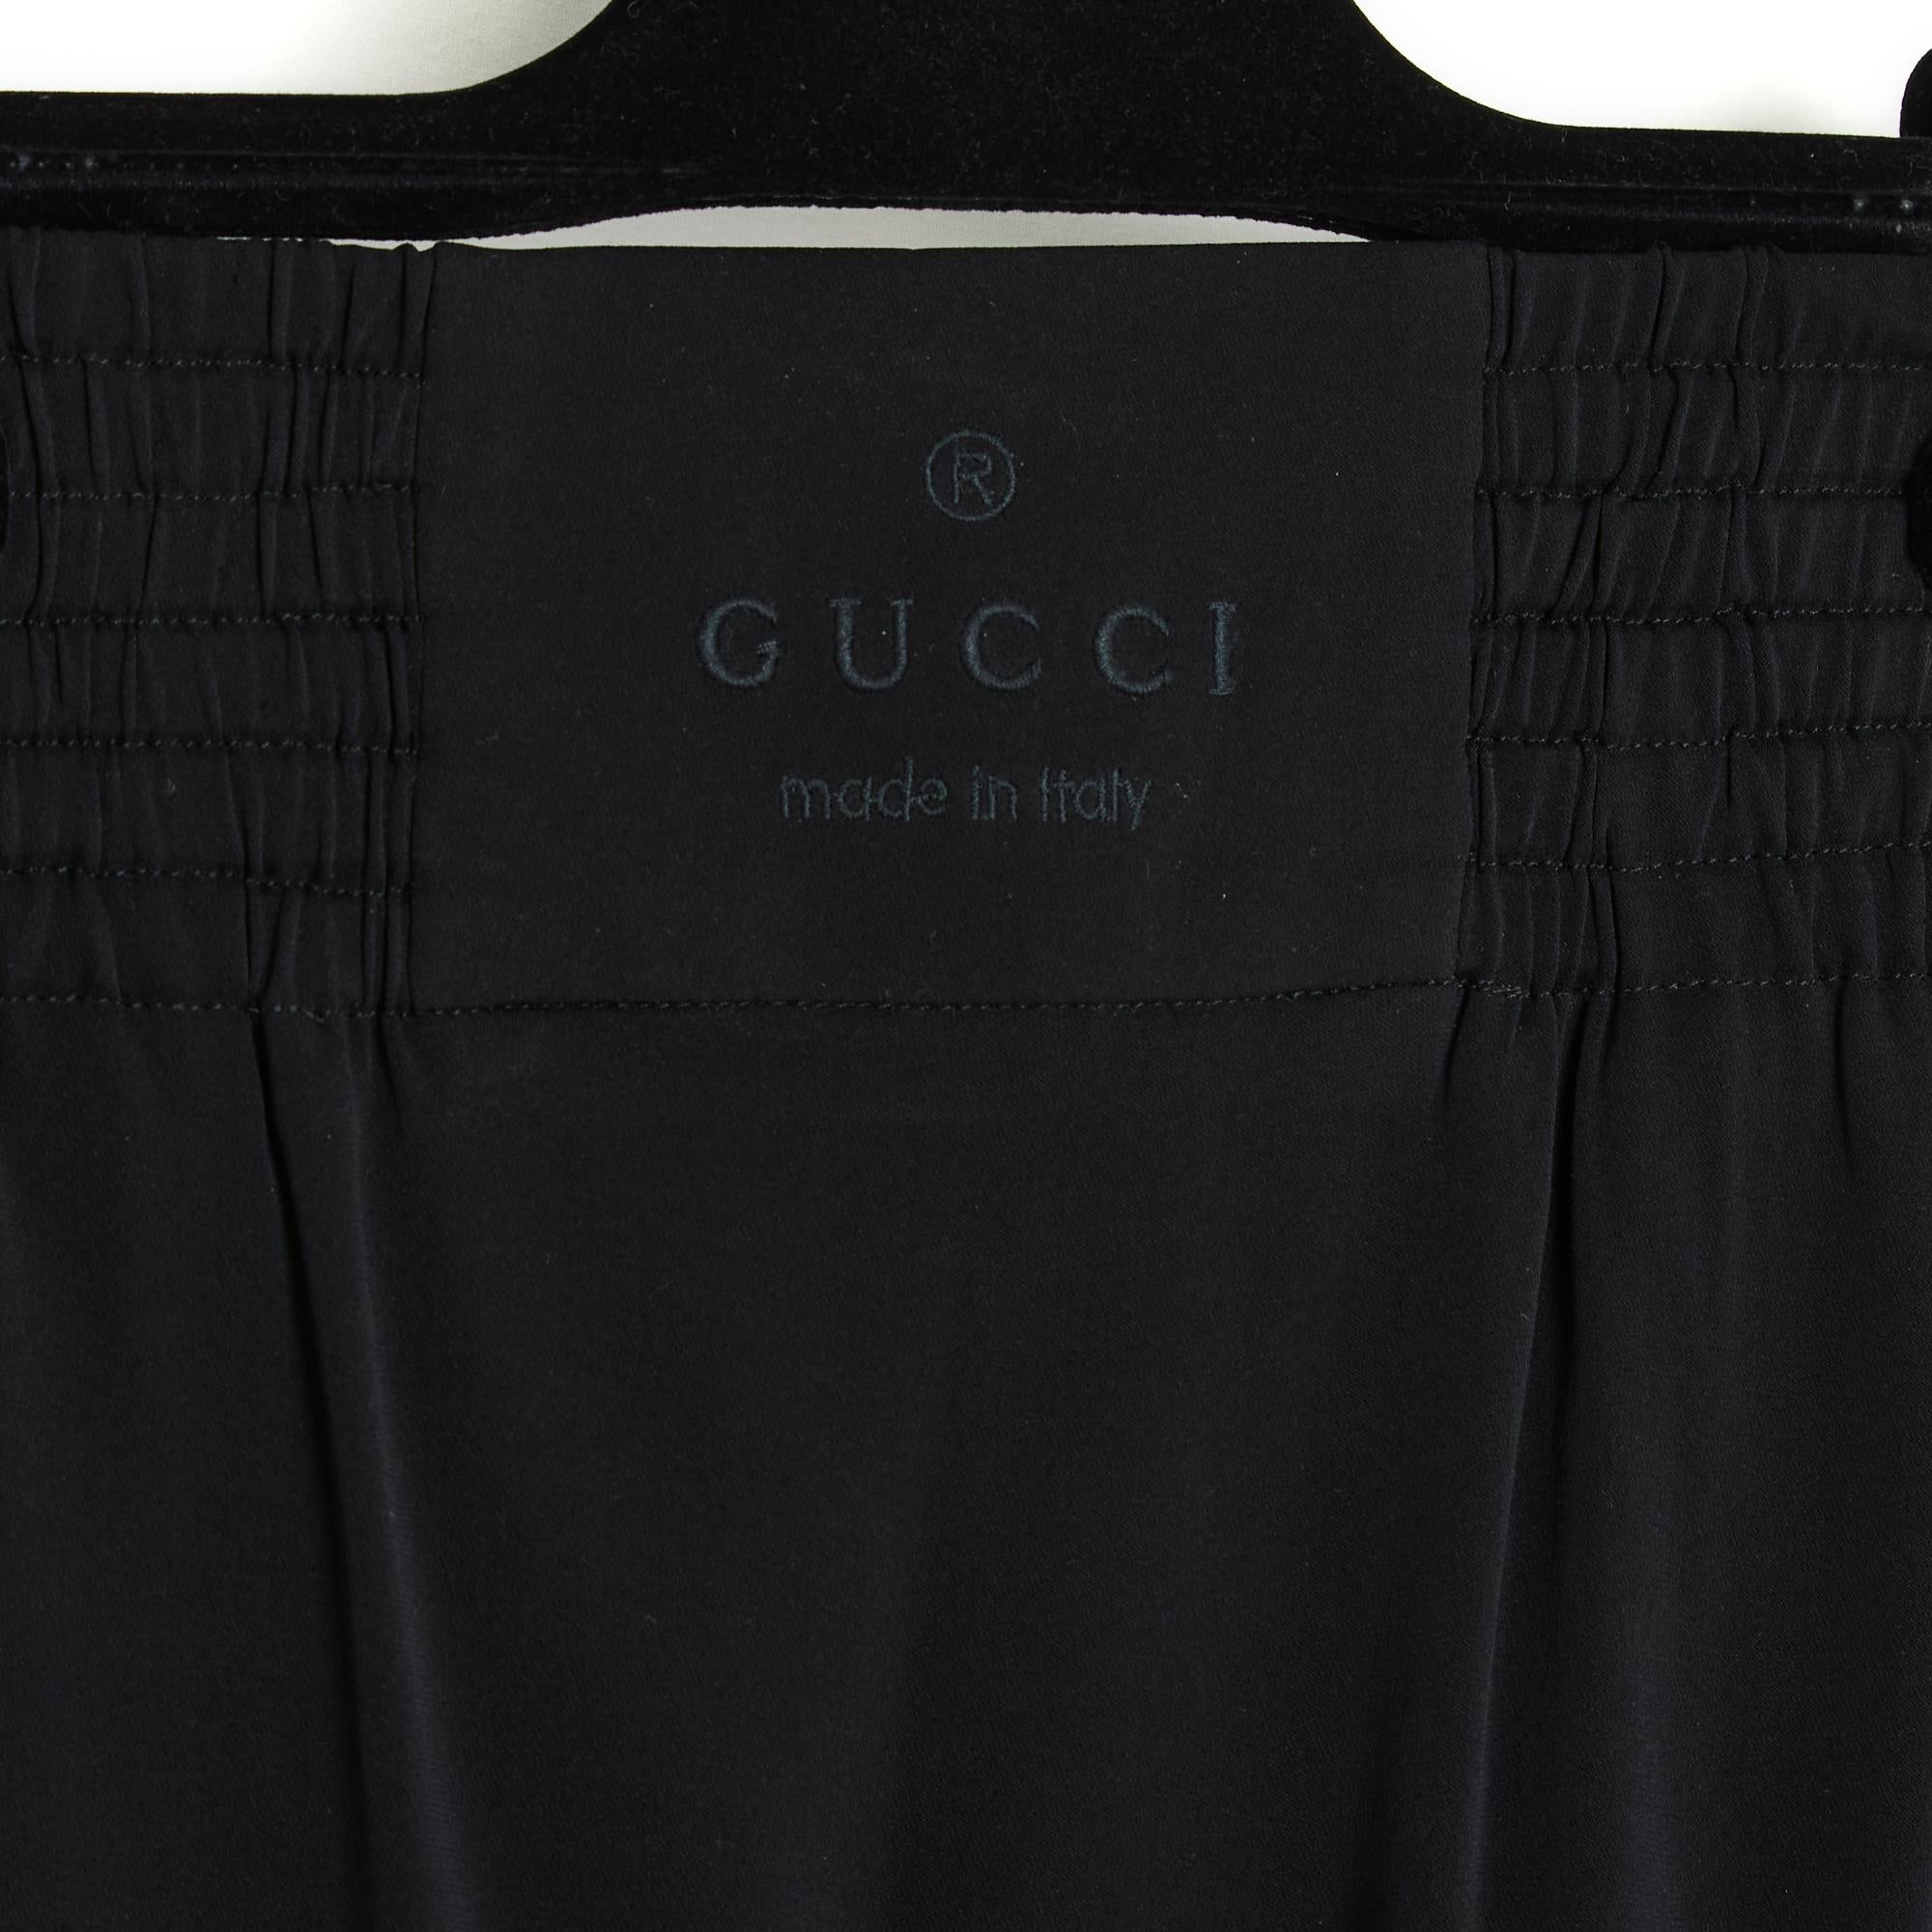 Short Gucci skirt in black silk crepe and elastane, boxer-style smocked elastic waist with smooth part embroidered with the Gucci logo on the front, 2 slit pockets closed with 2 Gucci logo snaps, unlined. Size 38IT or 34FR or UK 6 and US4: size